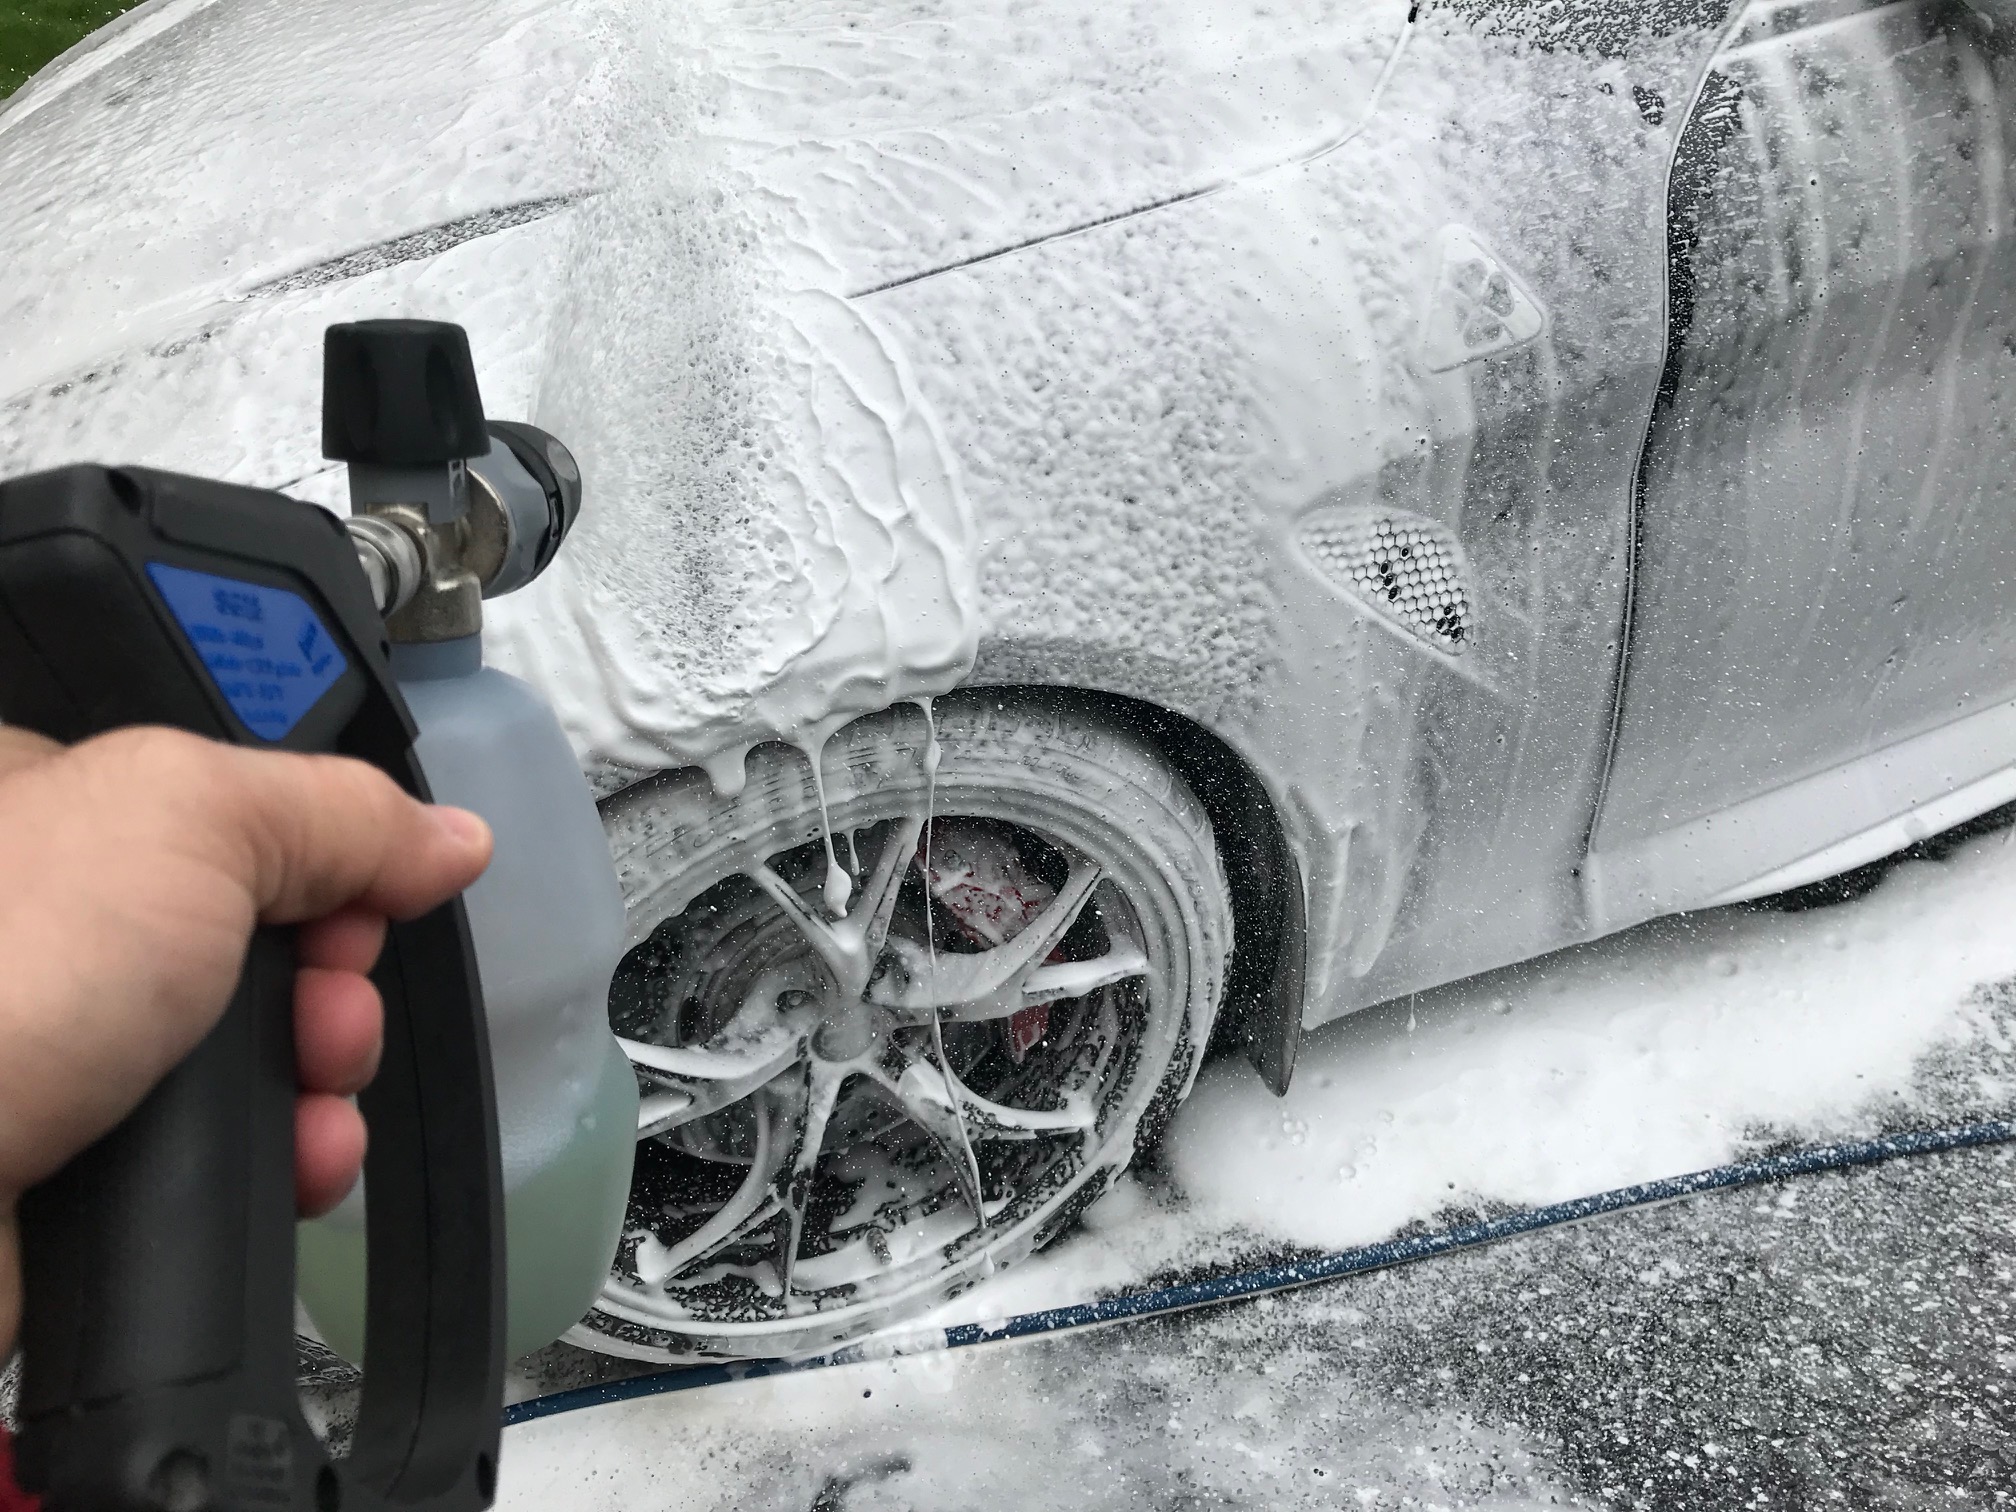 Snow Foam - Deluxe Foam Shampoo at Rs 1000/can, AutoBros Car Detailing  Products in Chandigarh